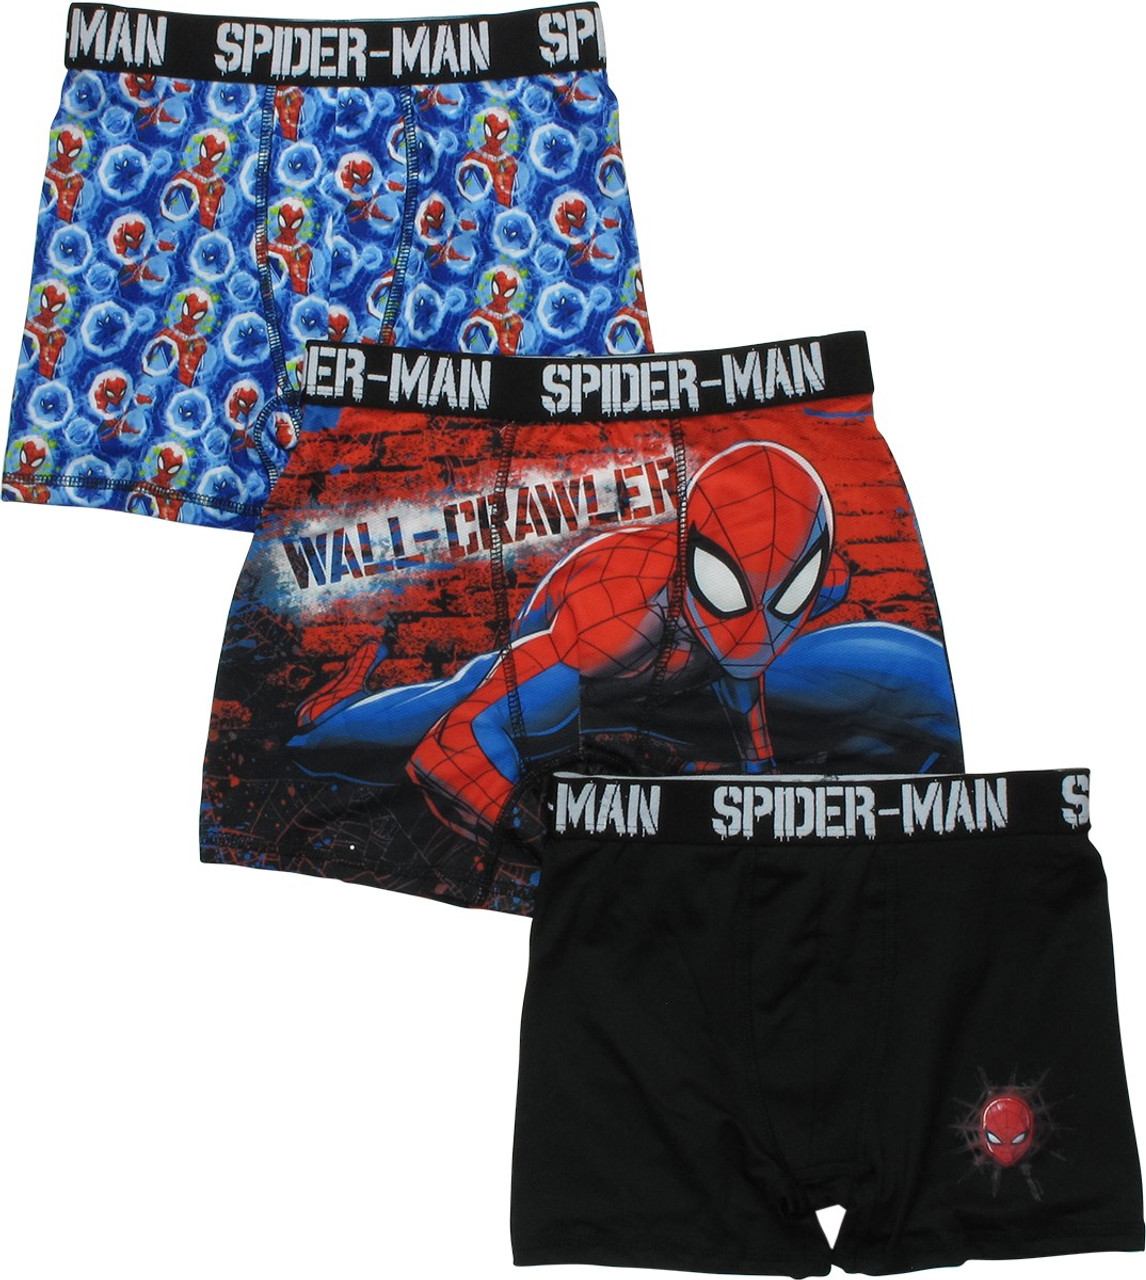 https://cdn11.bigcommerce.com/s-kjvm95bh8i/images/stencil/1280x1280/products/79080/129141/boxer-spiderman-wall-3pk-briefs-youth__44032.1624654697.jpg?c=2